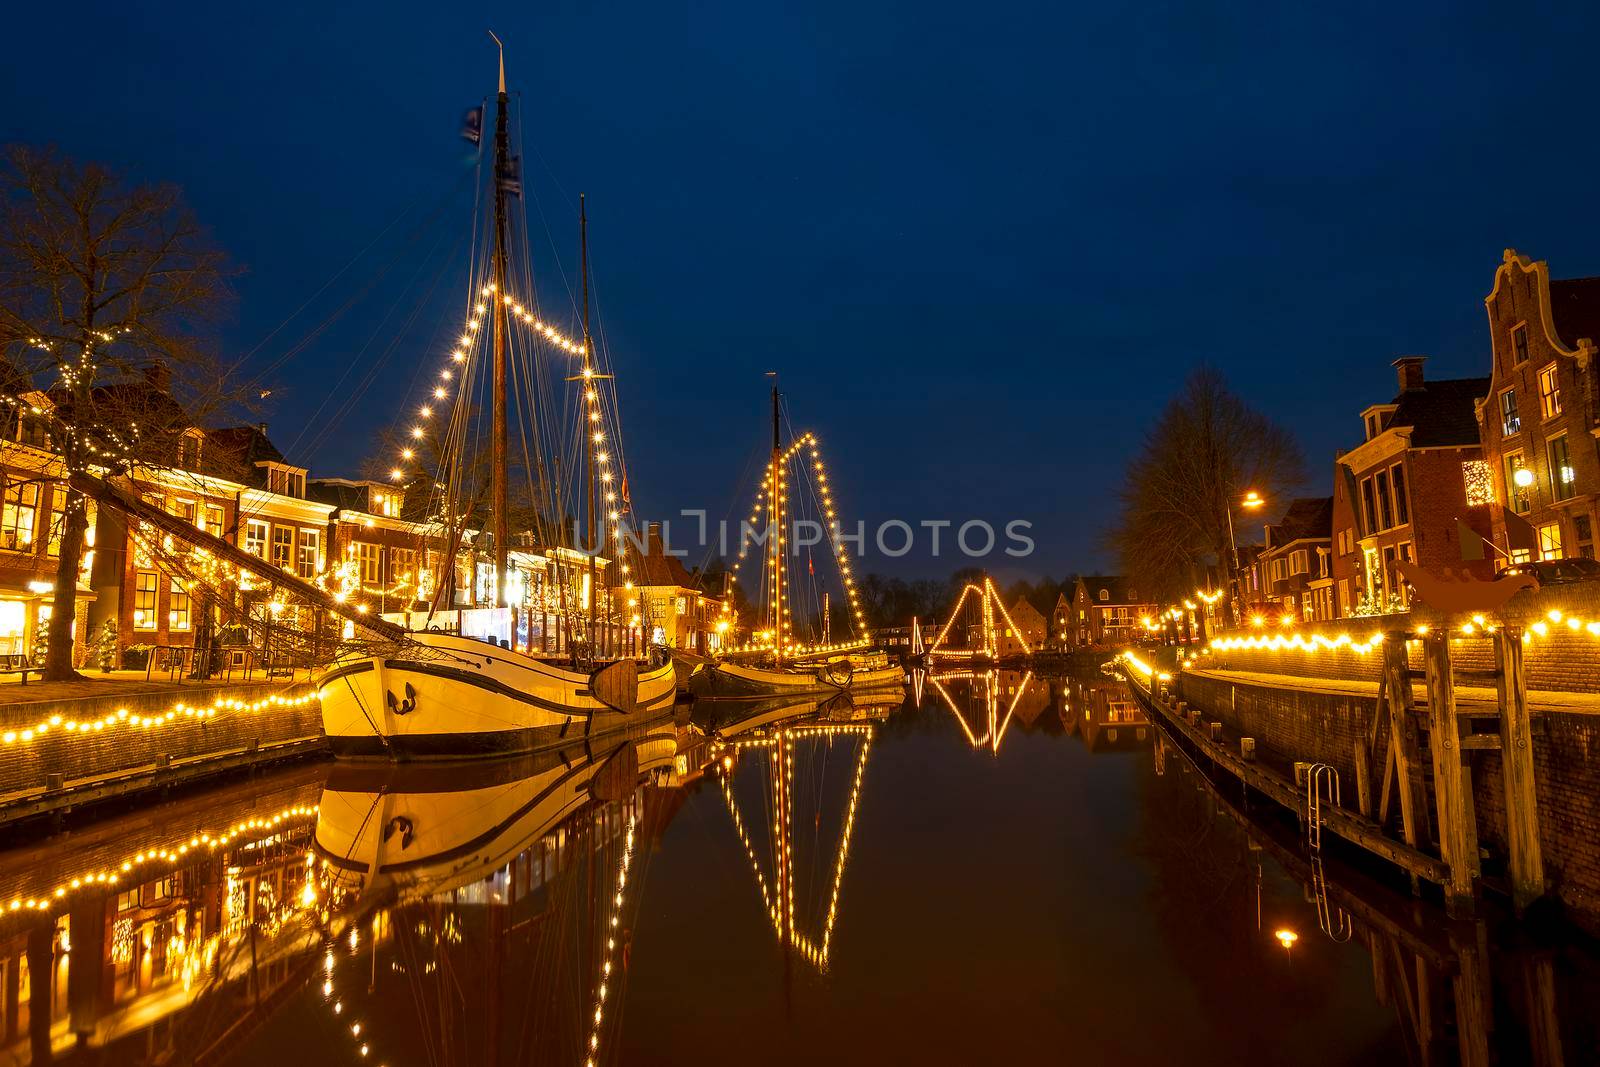 Decorated traditional boats in the harbor from Dokkum in the Netherlands at christmas at night